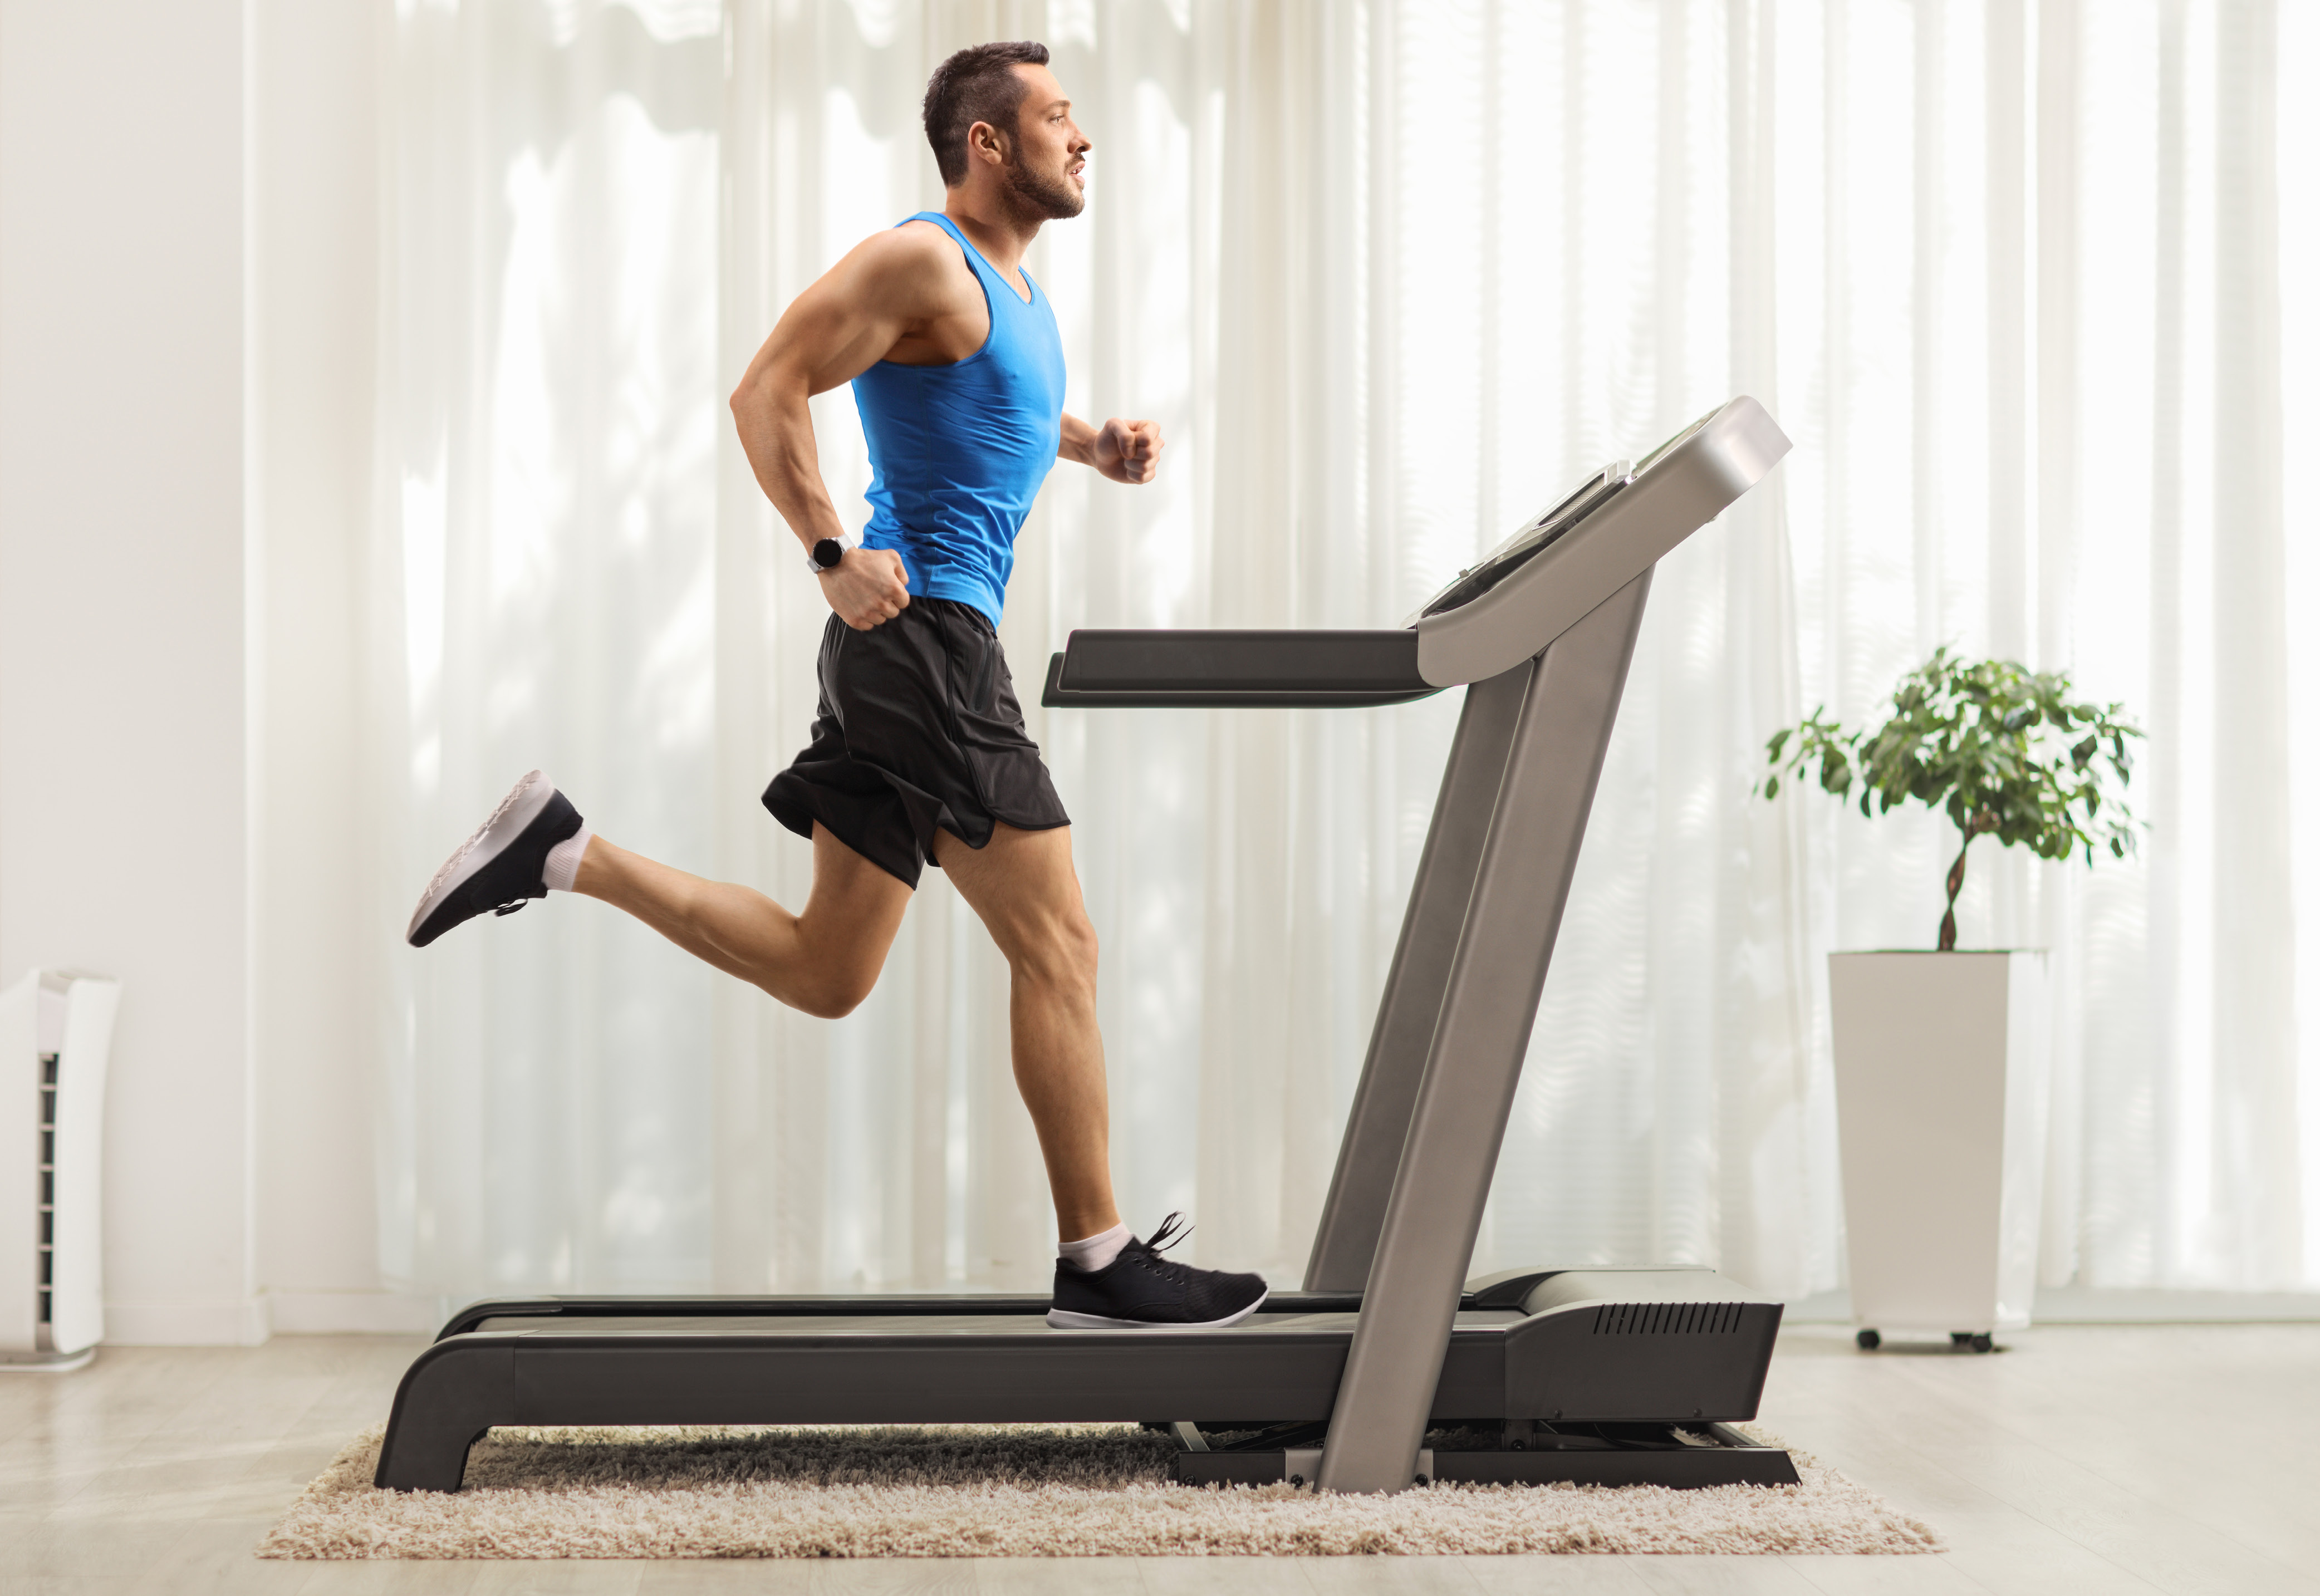 A man wearing athletic clothing running on a treadmill